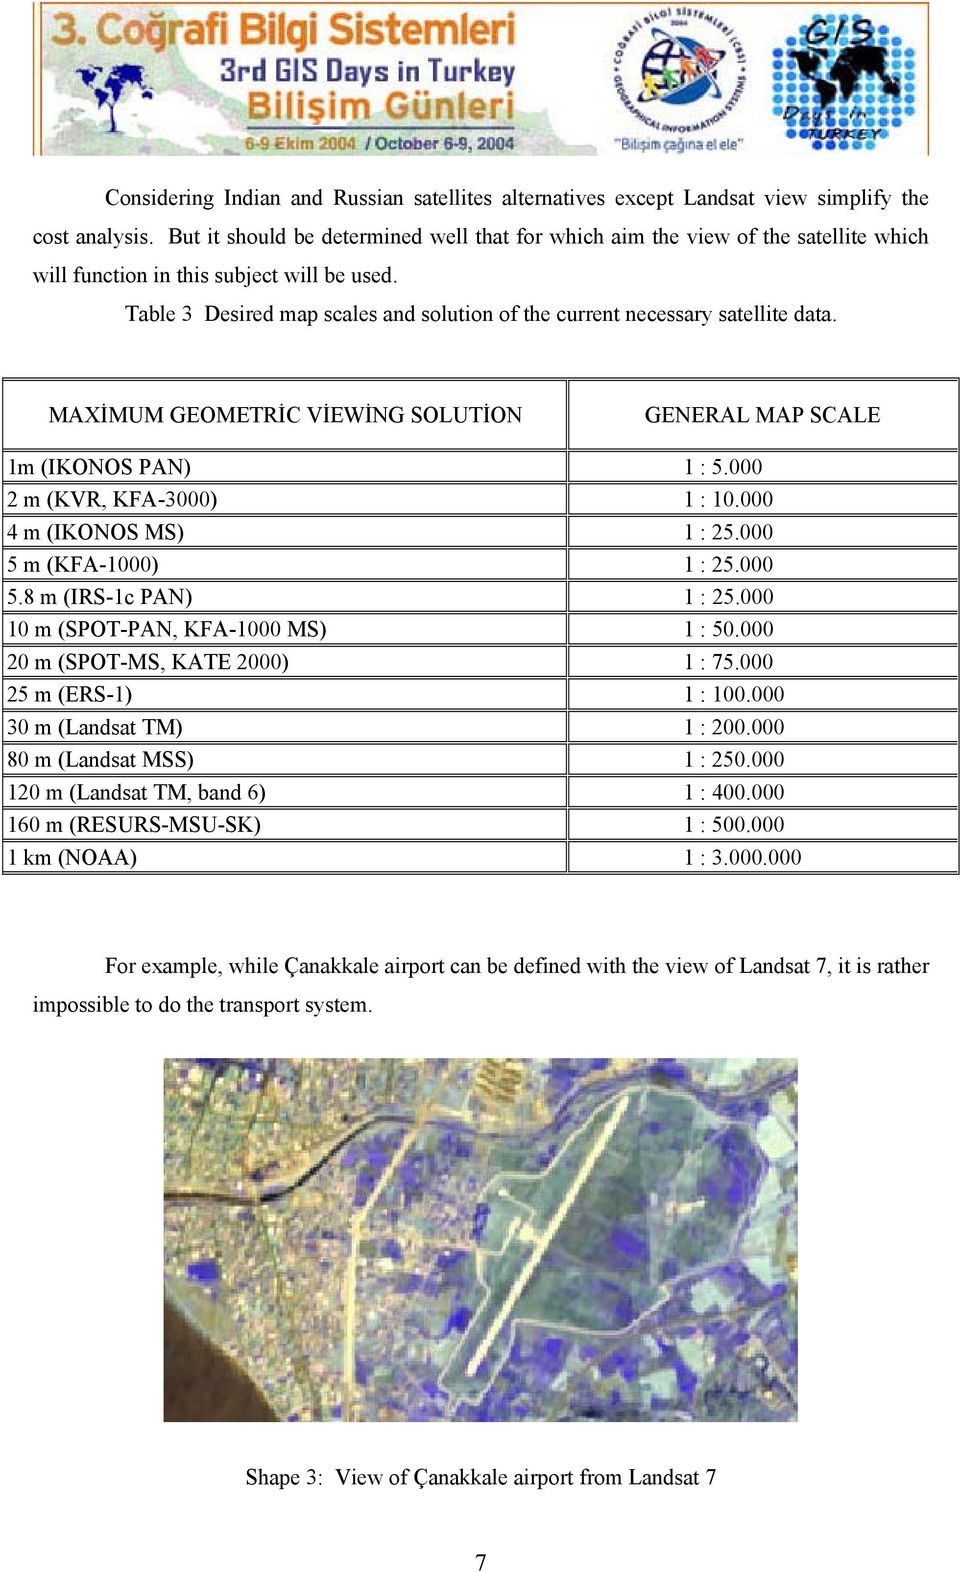 Table 3 Desired map scales and solution of the current necessary satellite data. MAXİMUM GEOMETRİC VİEWİNG SOLUTİON GENERAL MAP SCALE 1m (IKONOS PAN) 1 : 5.000 2 m (KVR, KFA-3000) 1 : 10.